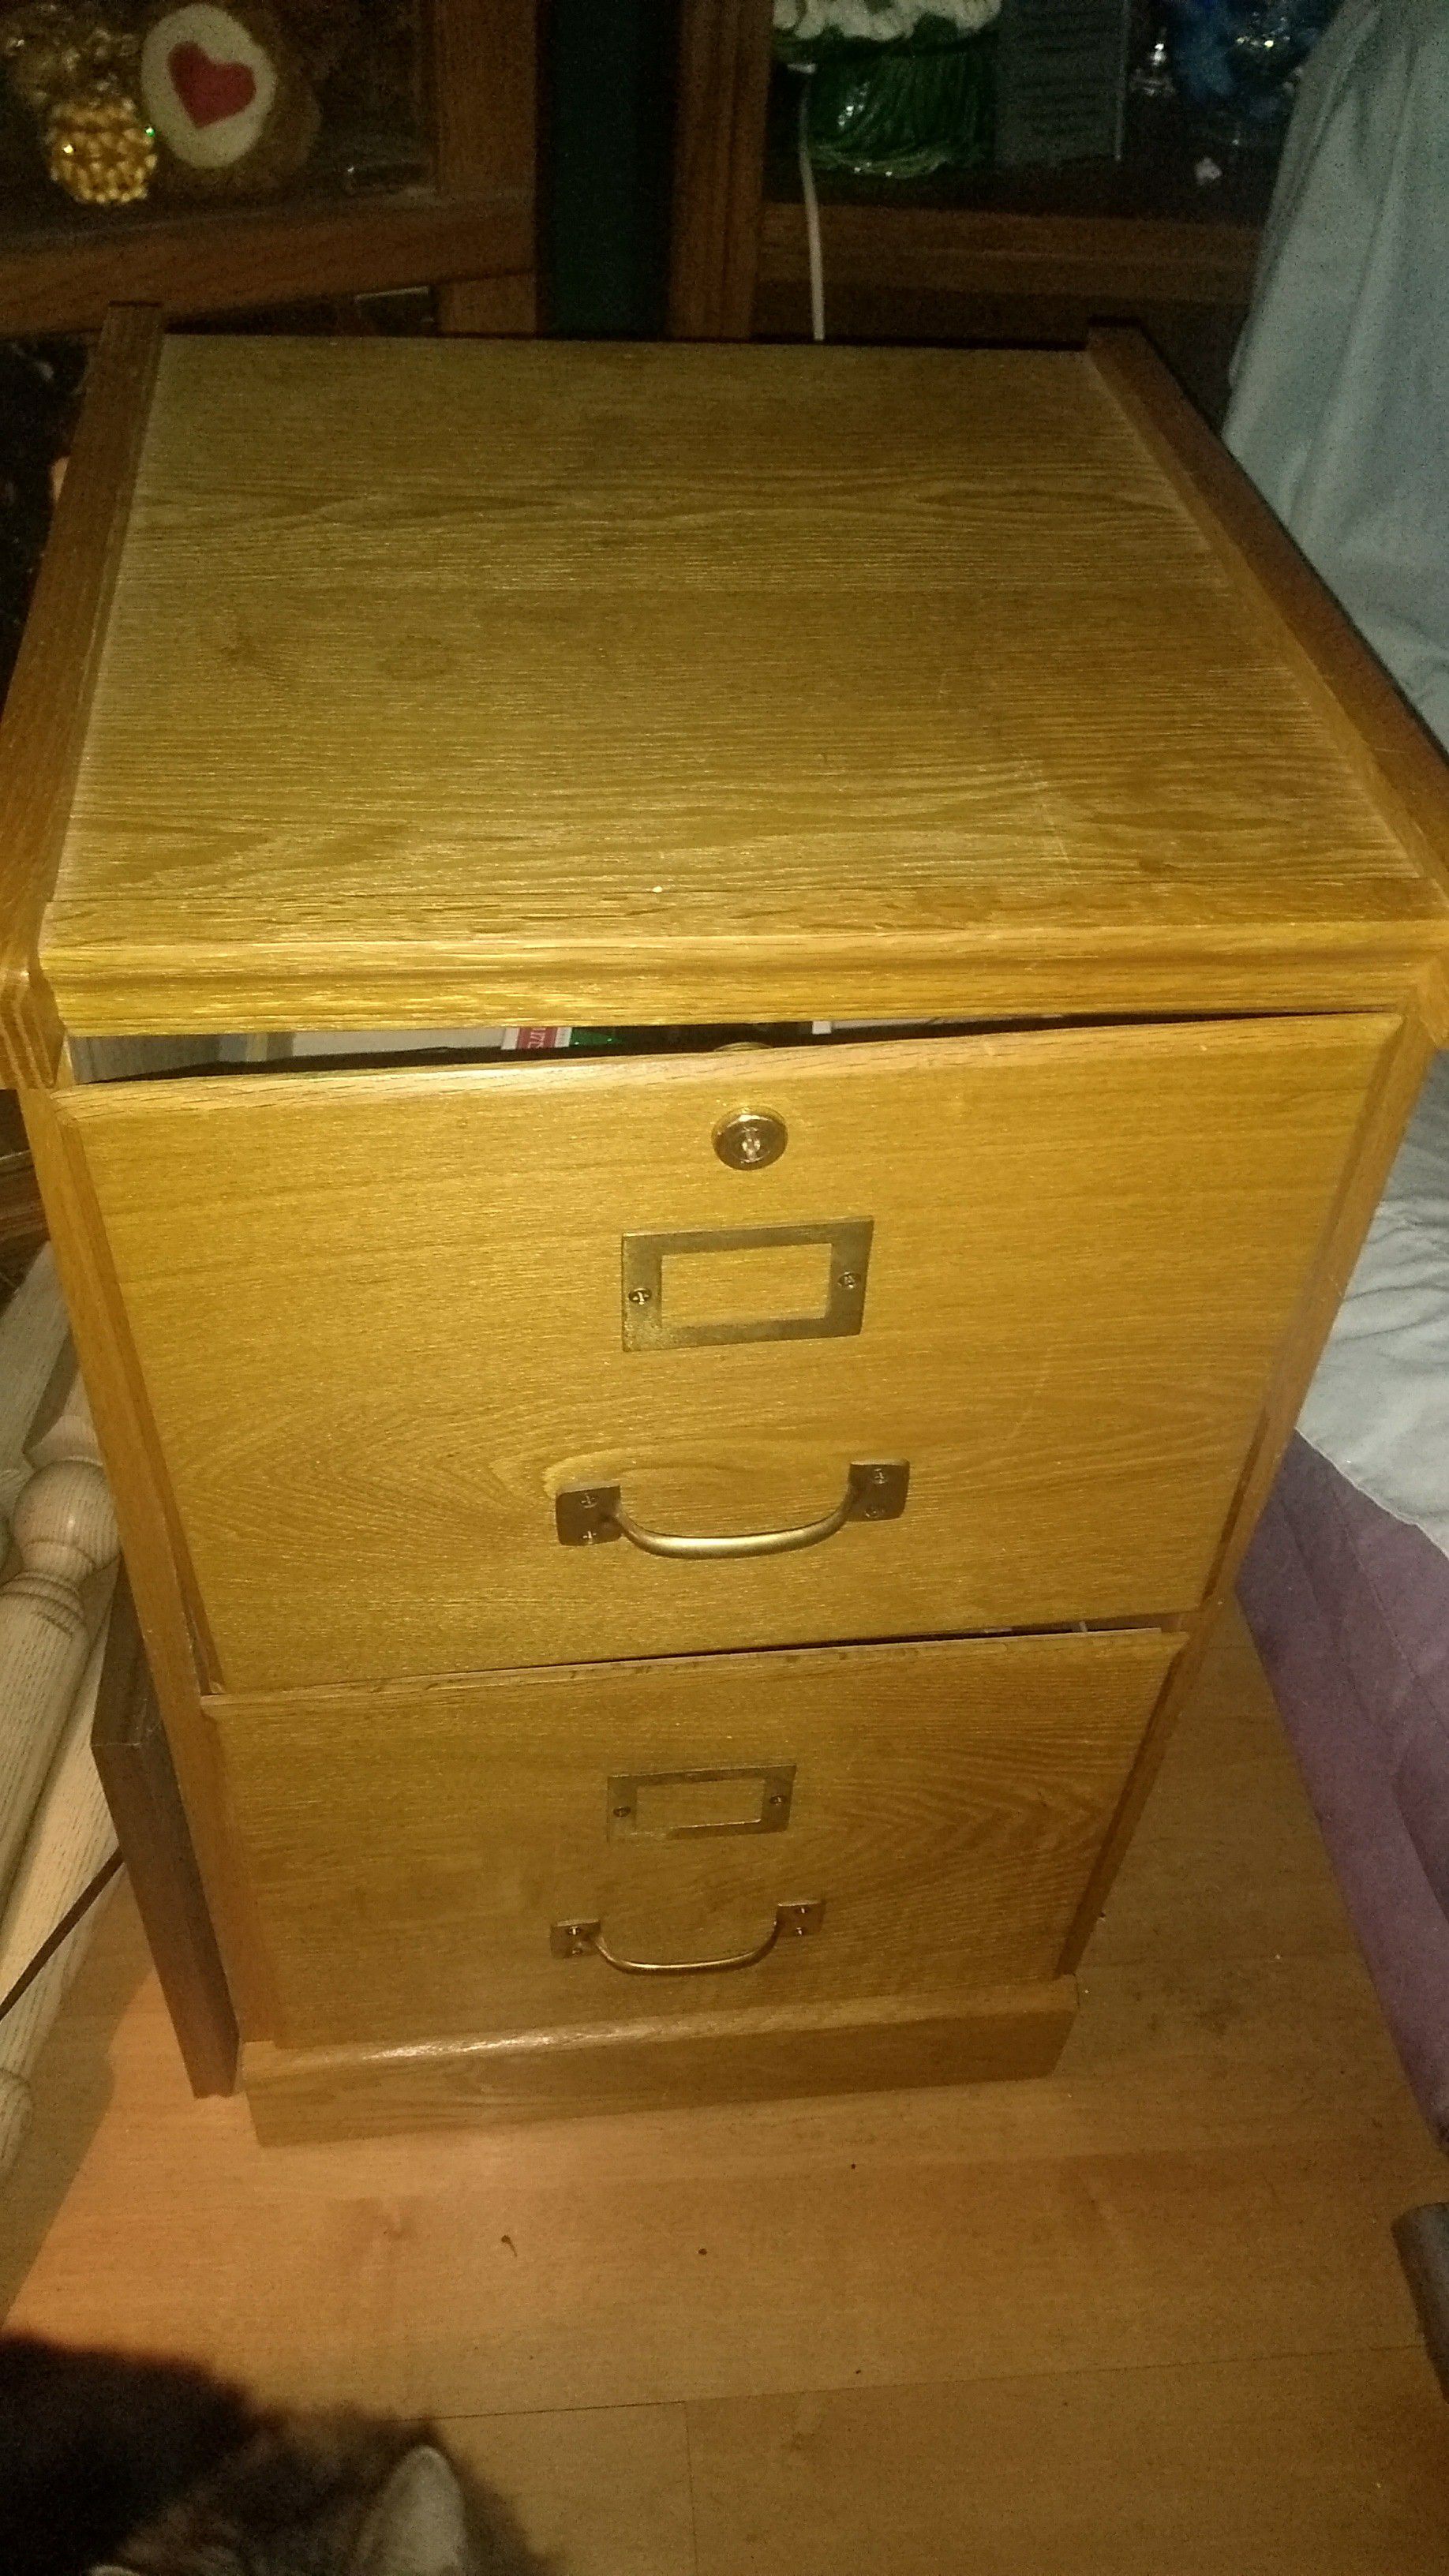 A nice Wooden filing cabinet good condition used